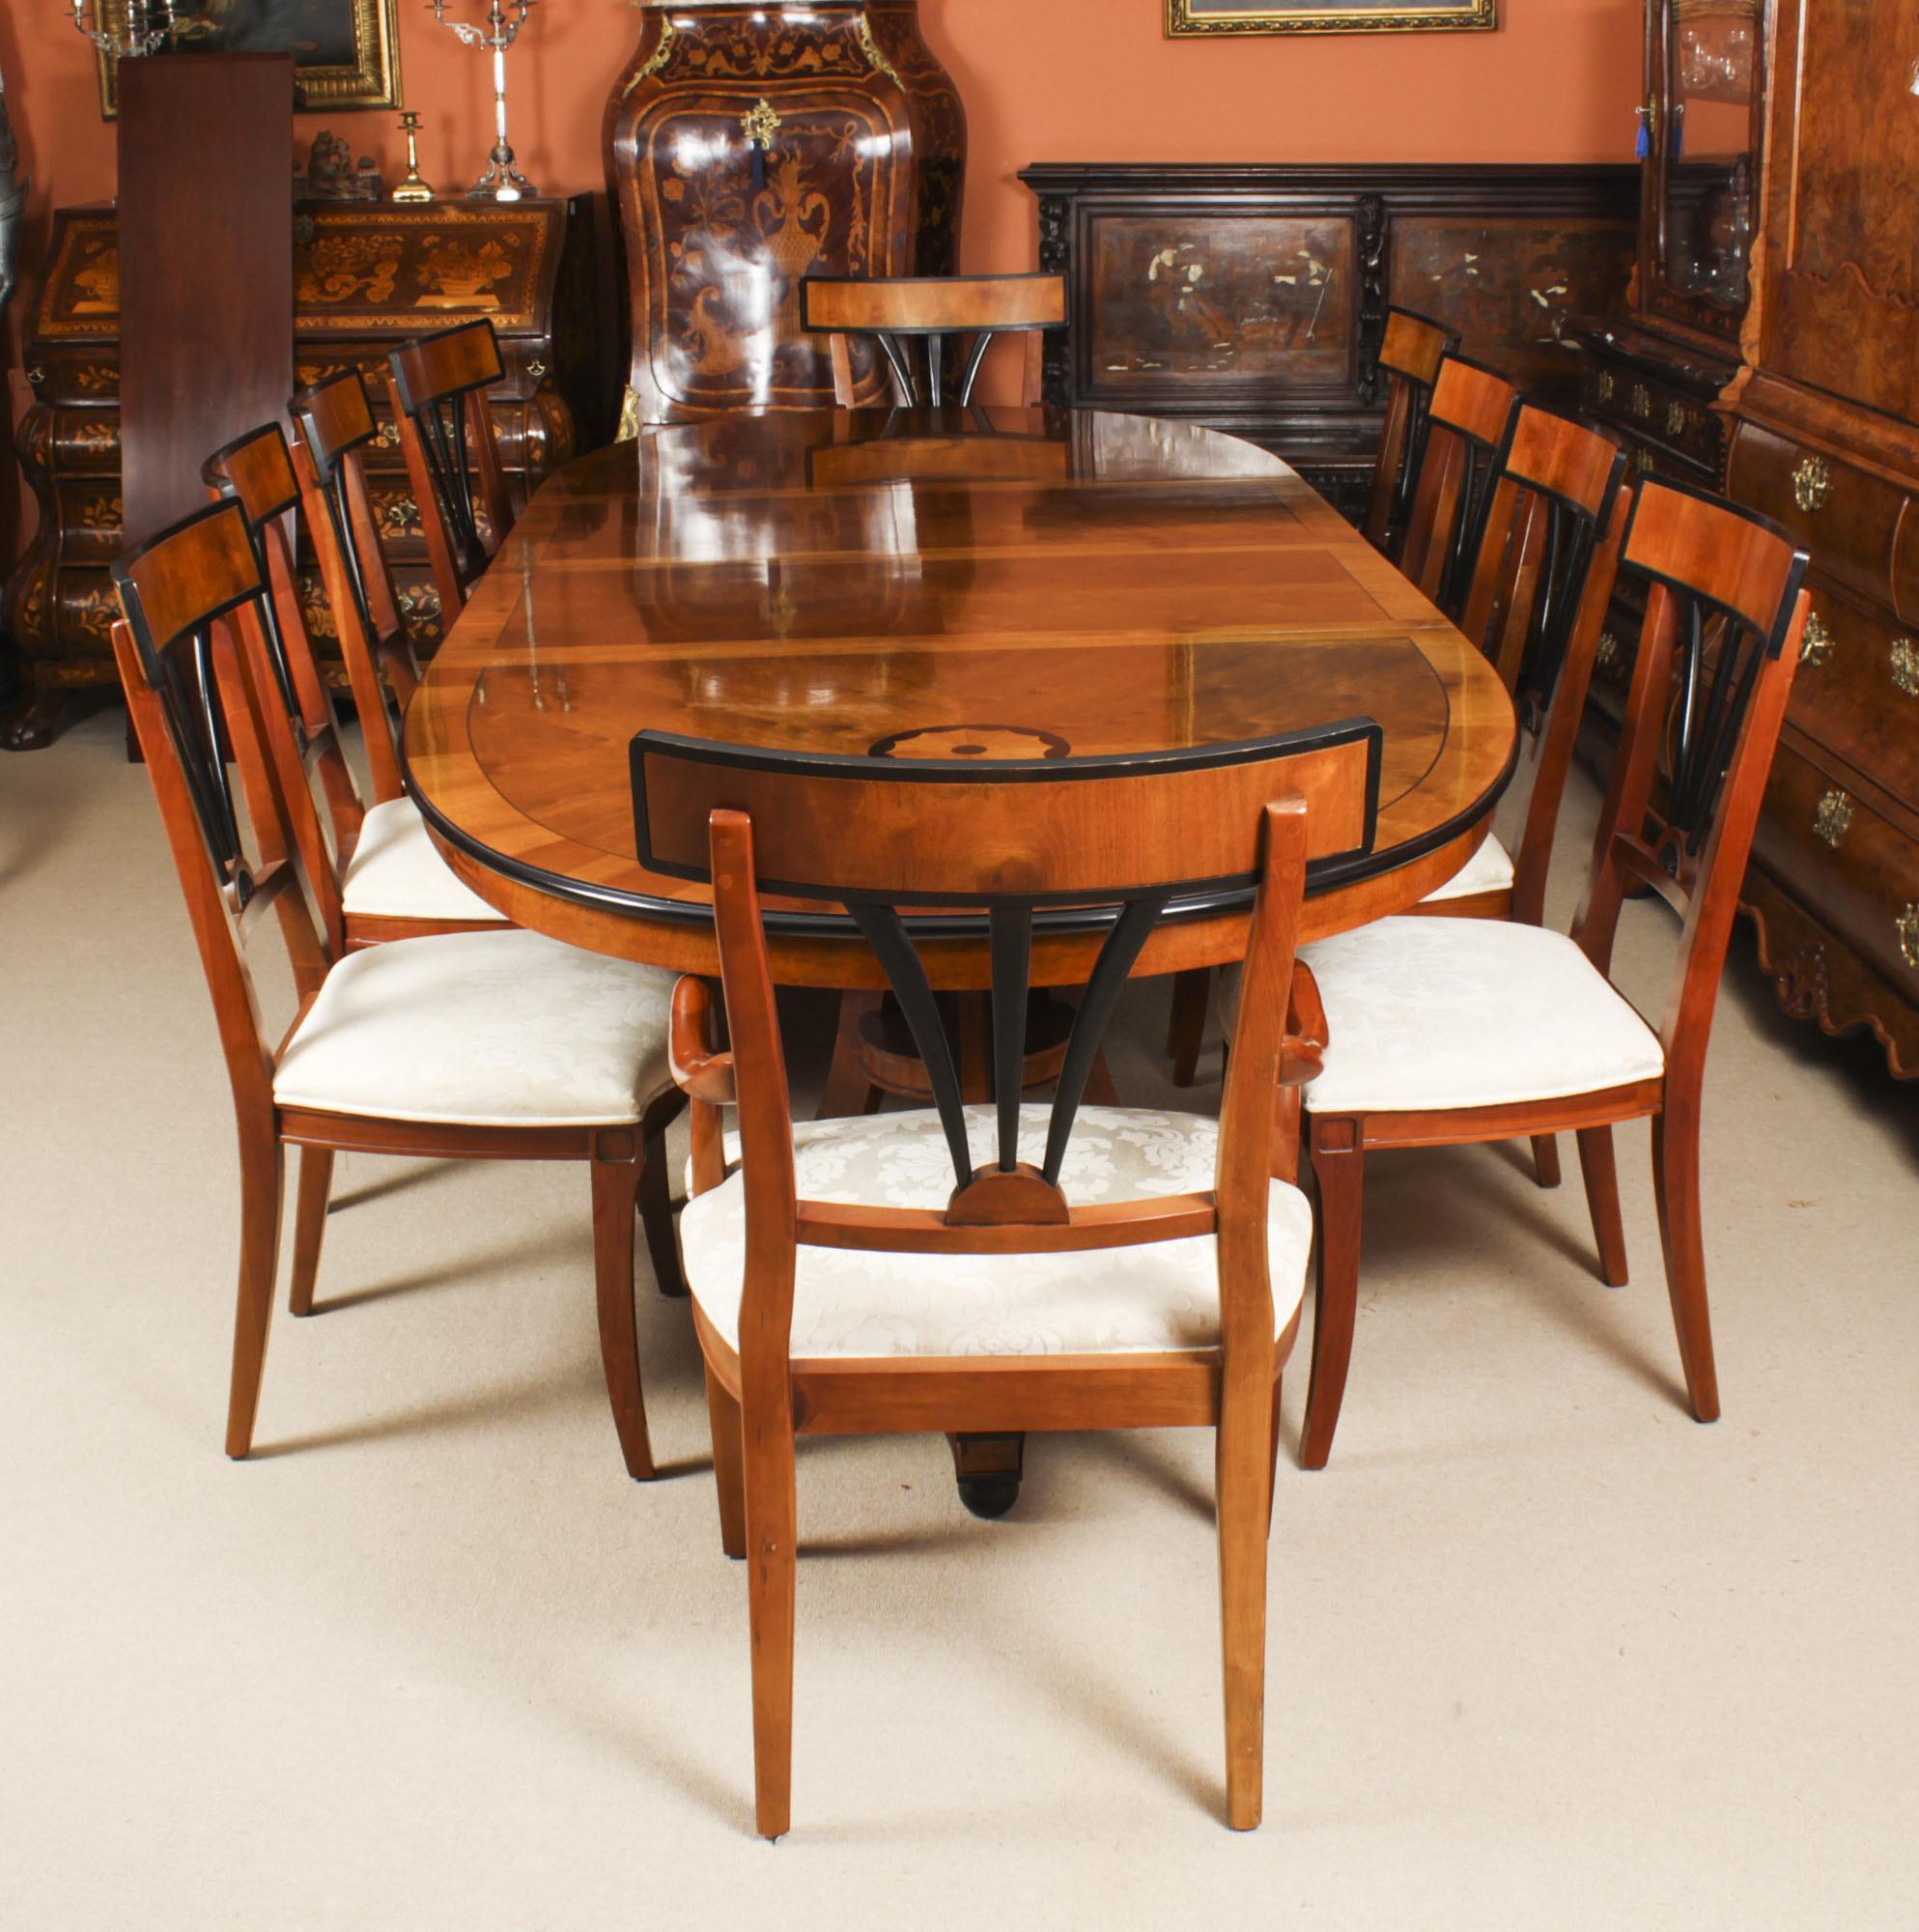 This is a fabulous high quality Biedermeier dining set comprising a satin birch twin pillar oval dining table and matching set of ten dining chairs, purchased at great expense from Harrods, Knightsbridge, London in the 1980s.

The oval satin birch